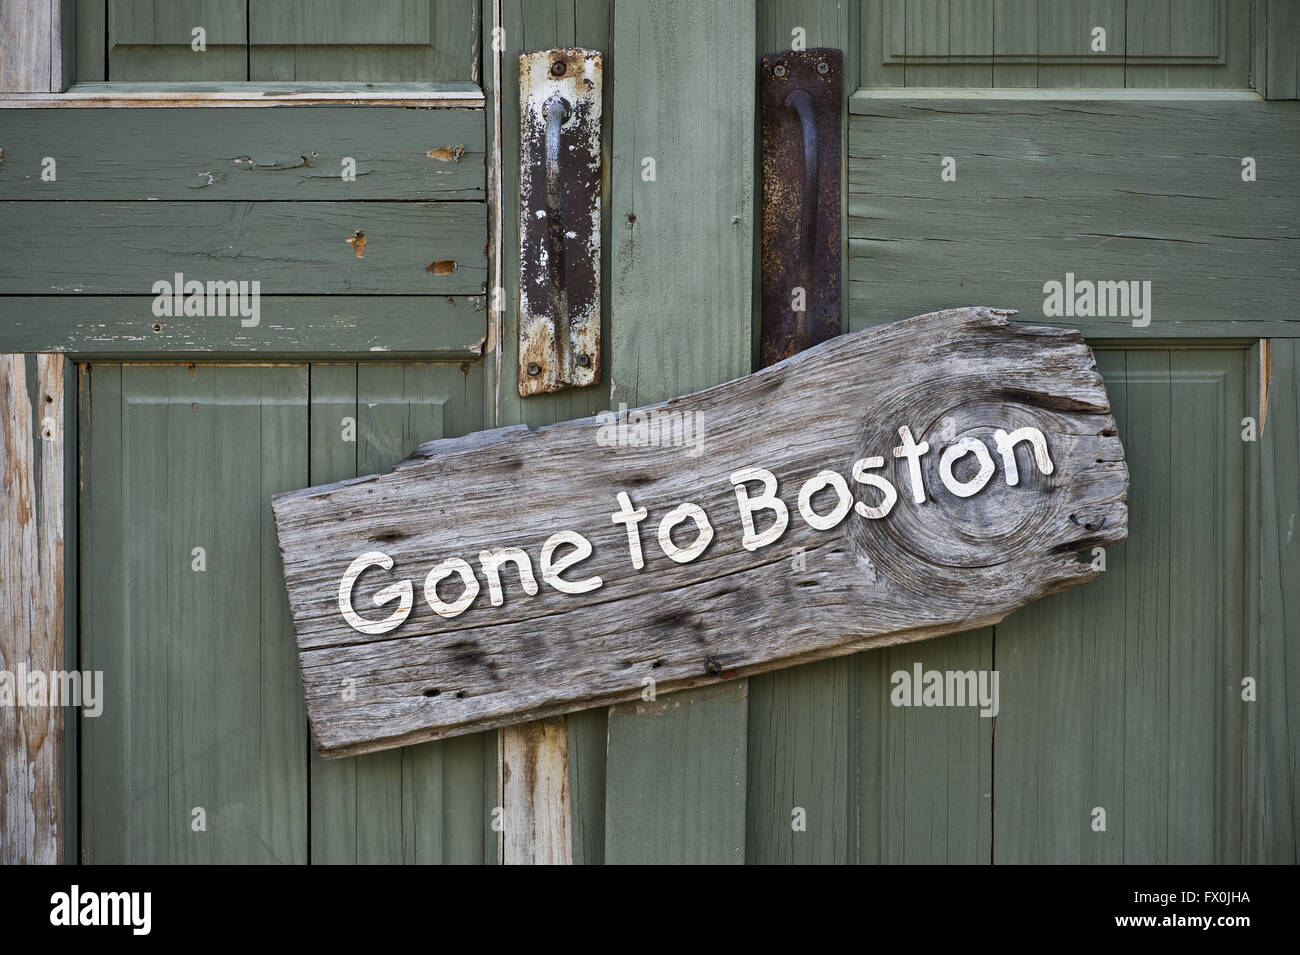 Gone to Boston sign on old green doors. Stock Photo